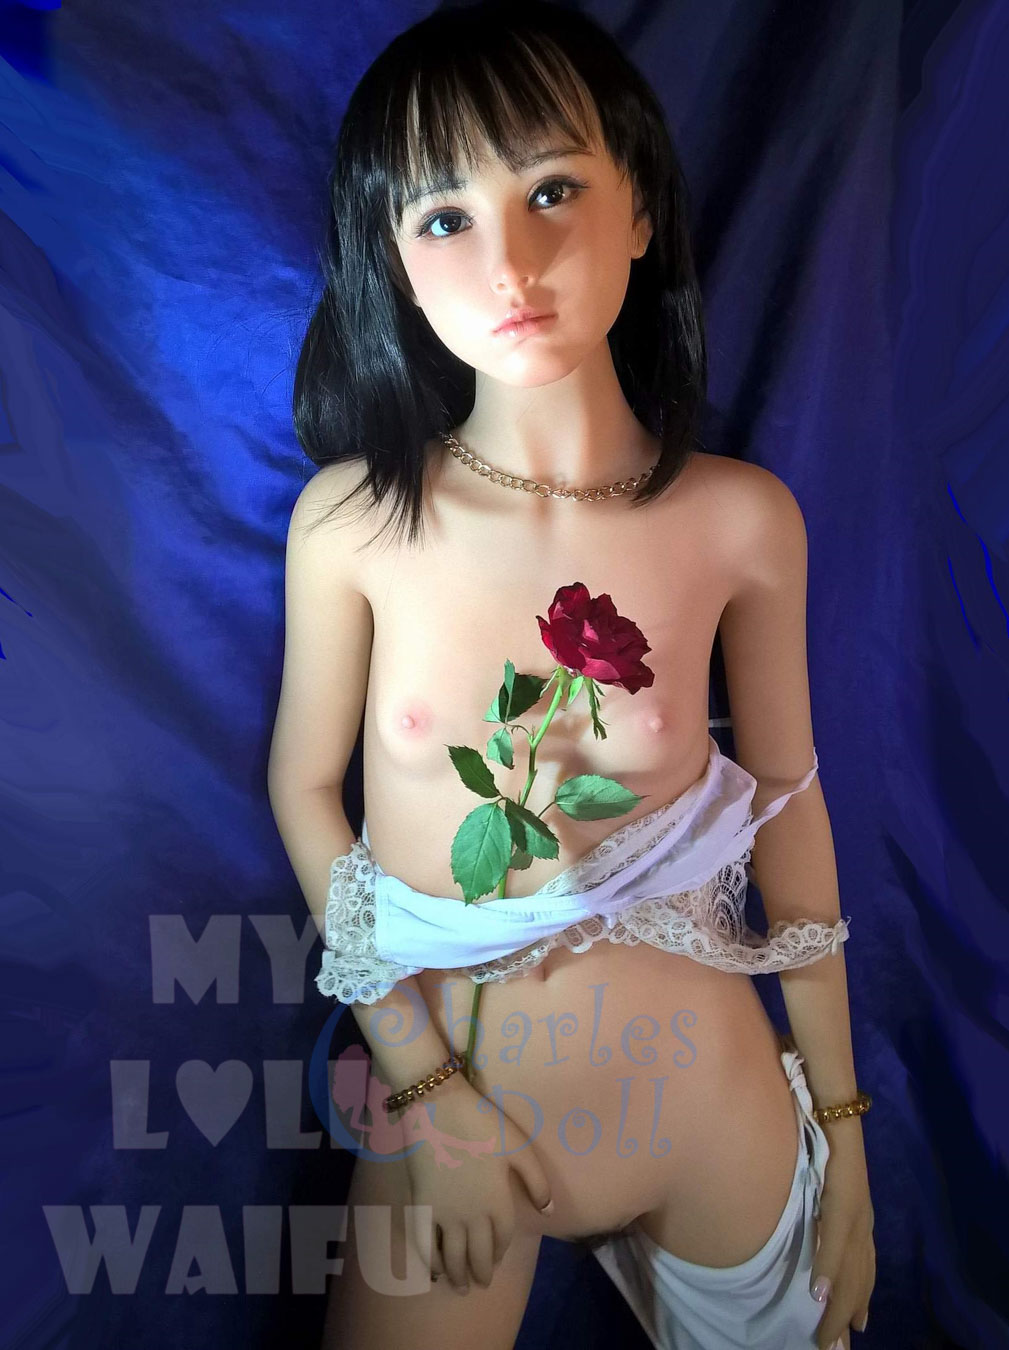 MLW-doll-145A 奈央 Nao